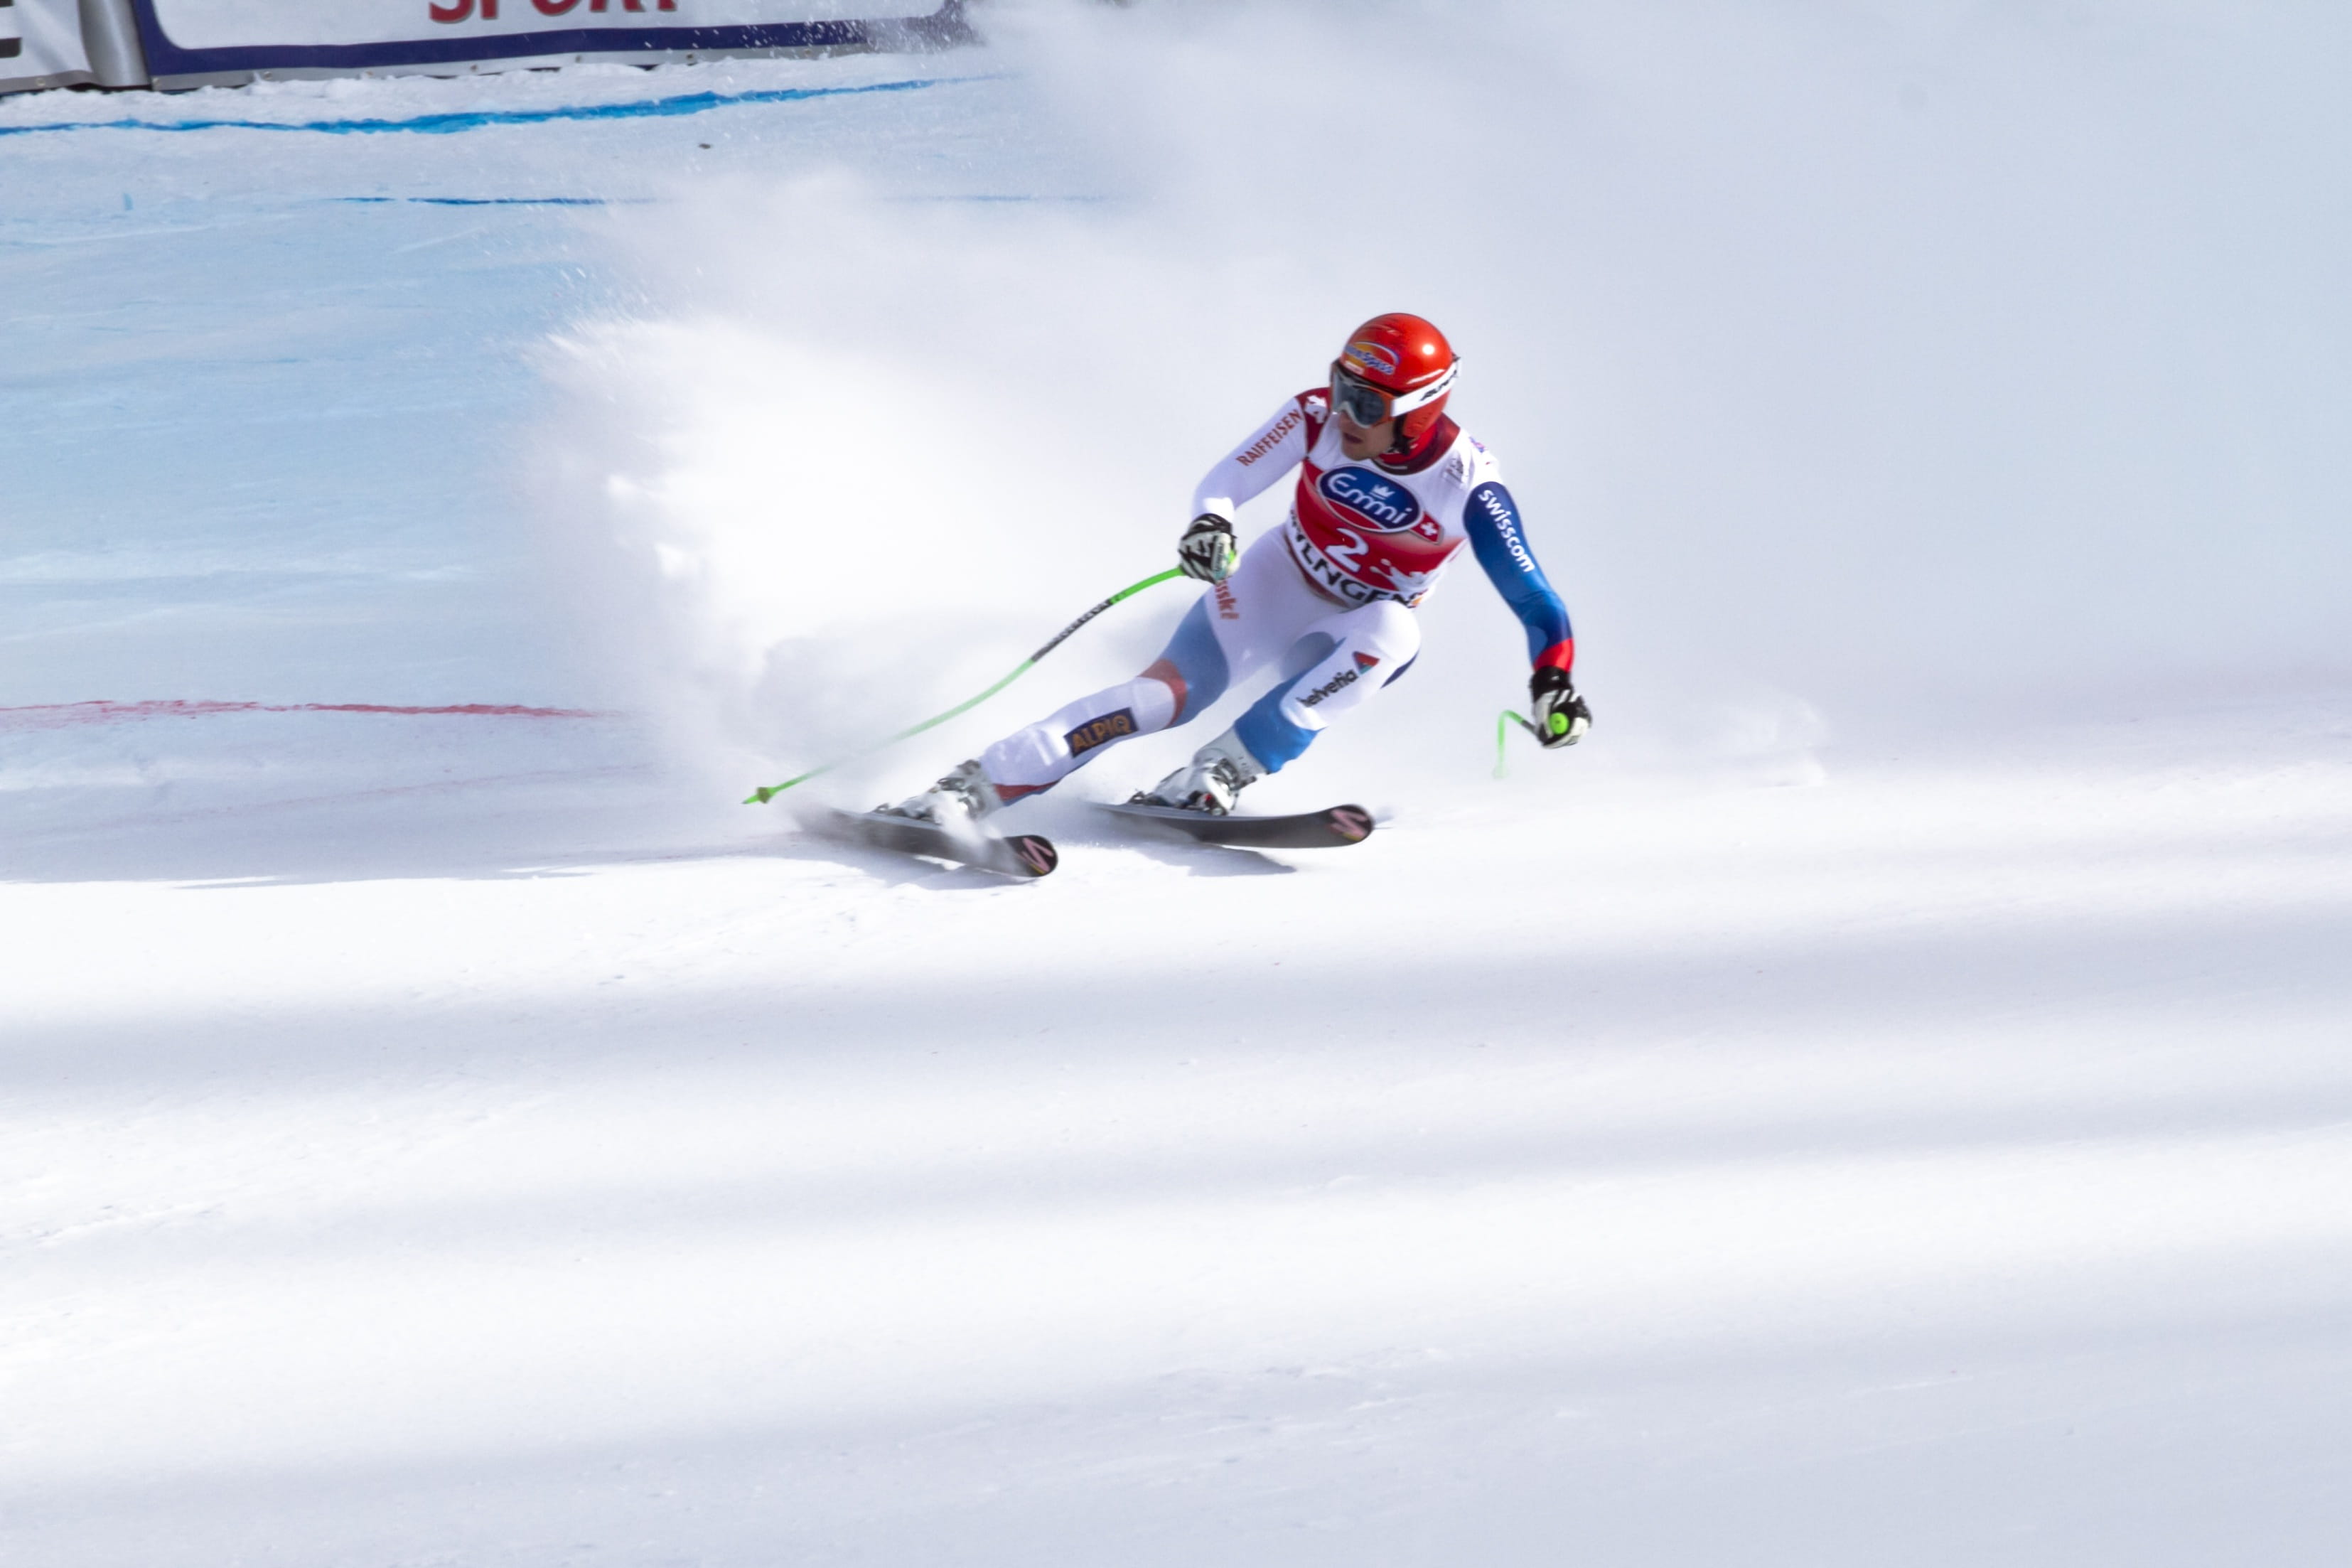 photo of man skiing on snow field during daytime, Race, World Cup